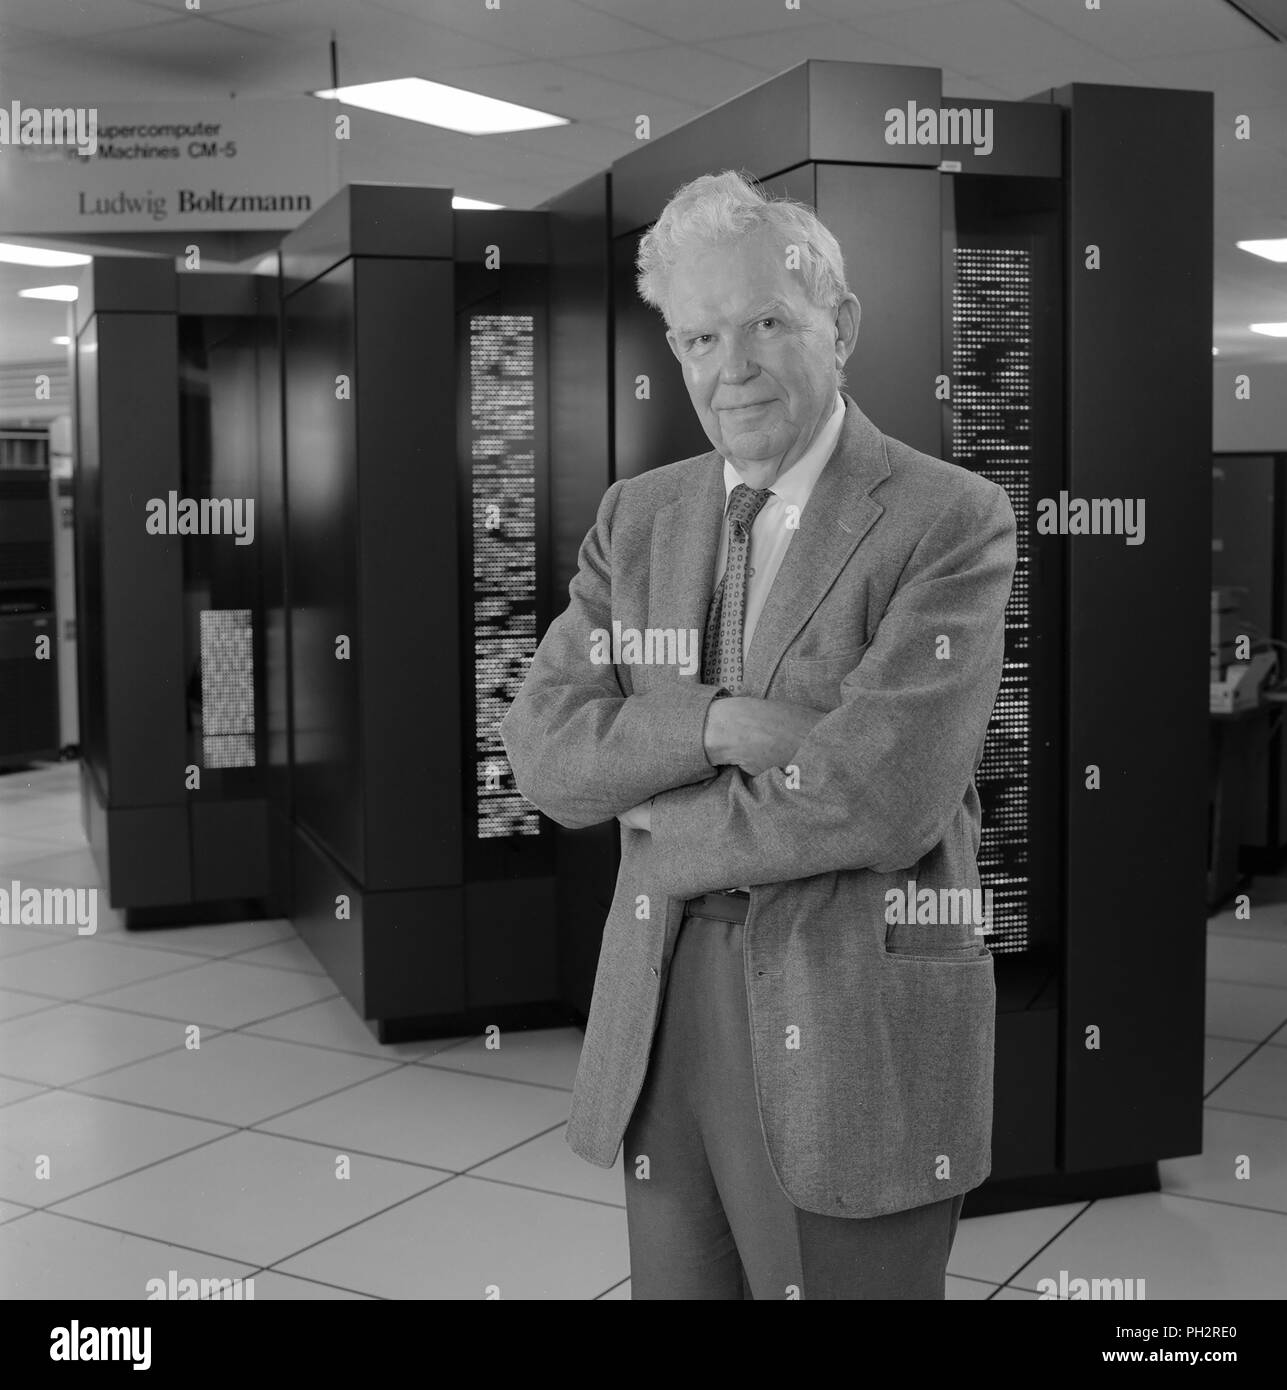 Black and white photograph of Harvey Lomax standing, in three-quarter view, in front of a CM-5 (Connection Machine-5) a massively parallel supercomputer, located in the NAS Facility N-258, photographed in honor of 50 years of service, in the Silicon Valley, Mountain View, California, May 25, 1994. Courtesy Internet Archive/NASA Ames. () Stock Photo